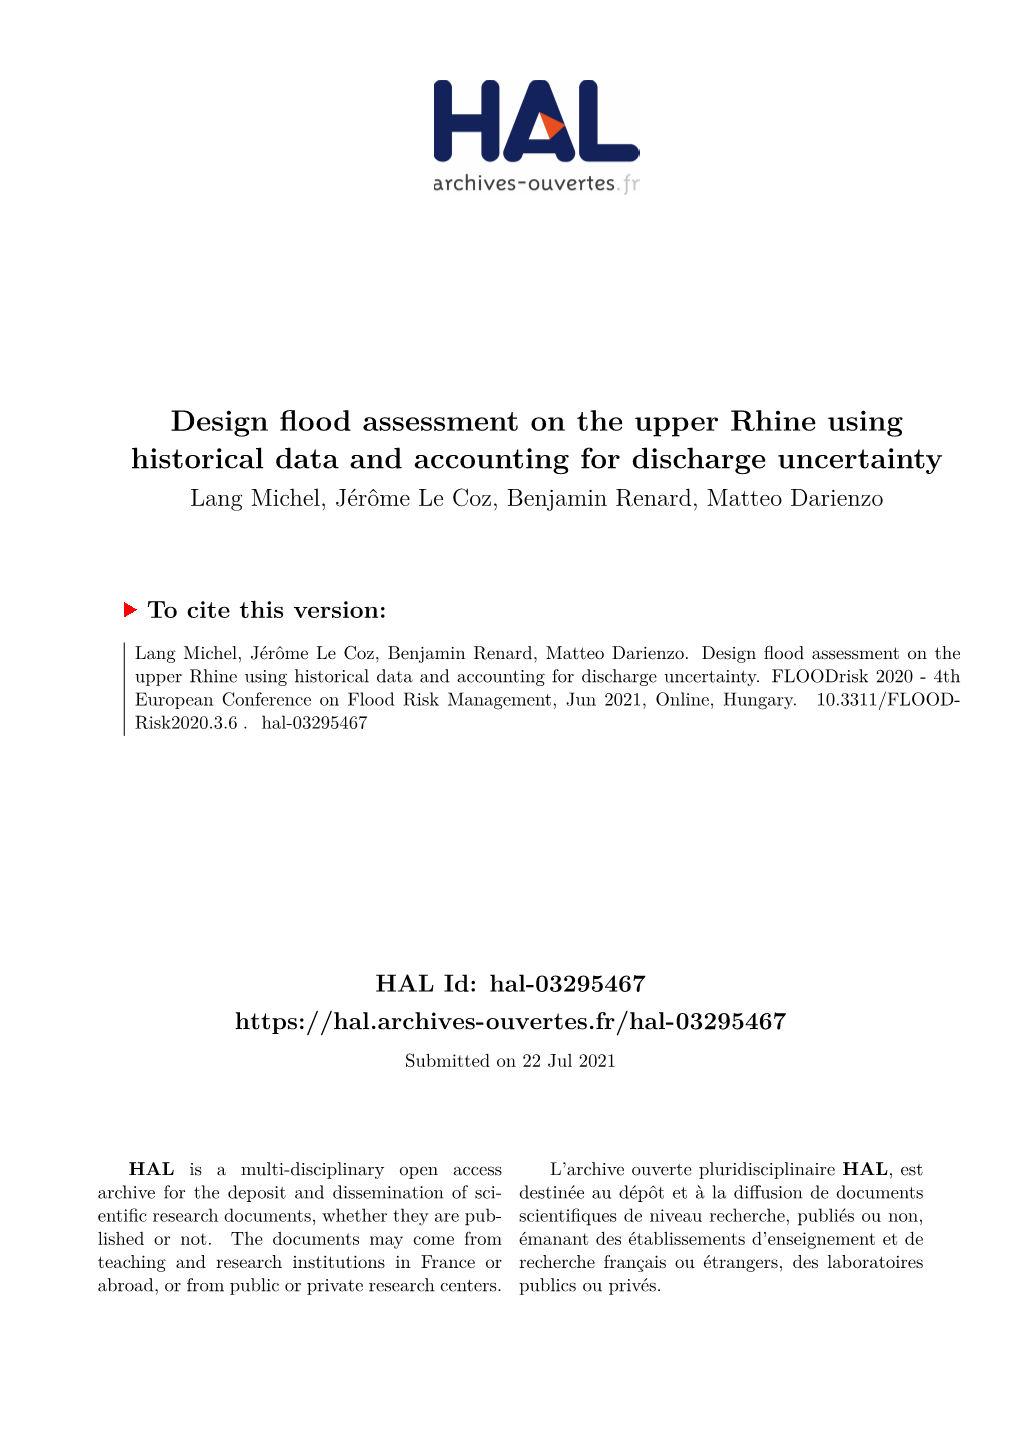 Design Flood Assessment on the Upper Rhine Using Historical Data and Accounting for Discharge Uncertainty Lang Michel, Jérôme Le Coz, Benjamin Renard, Matteo Darienzo